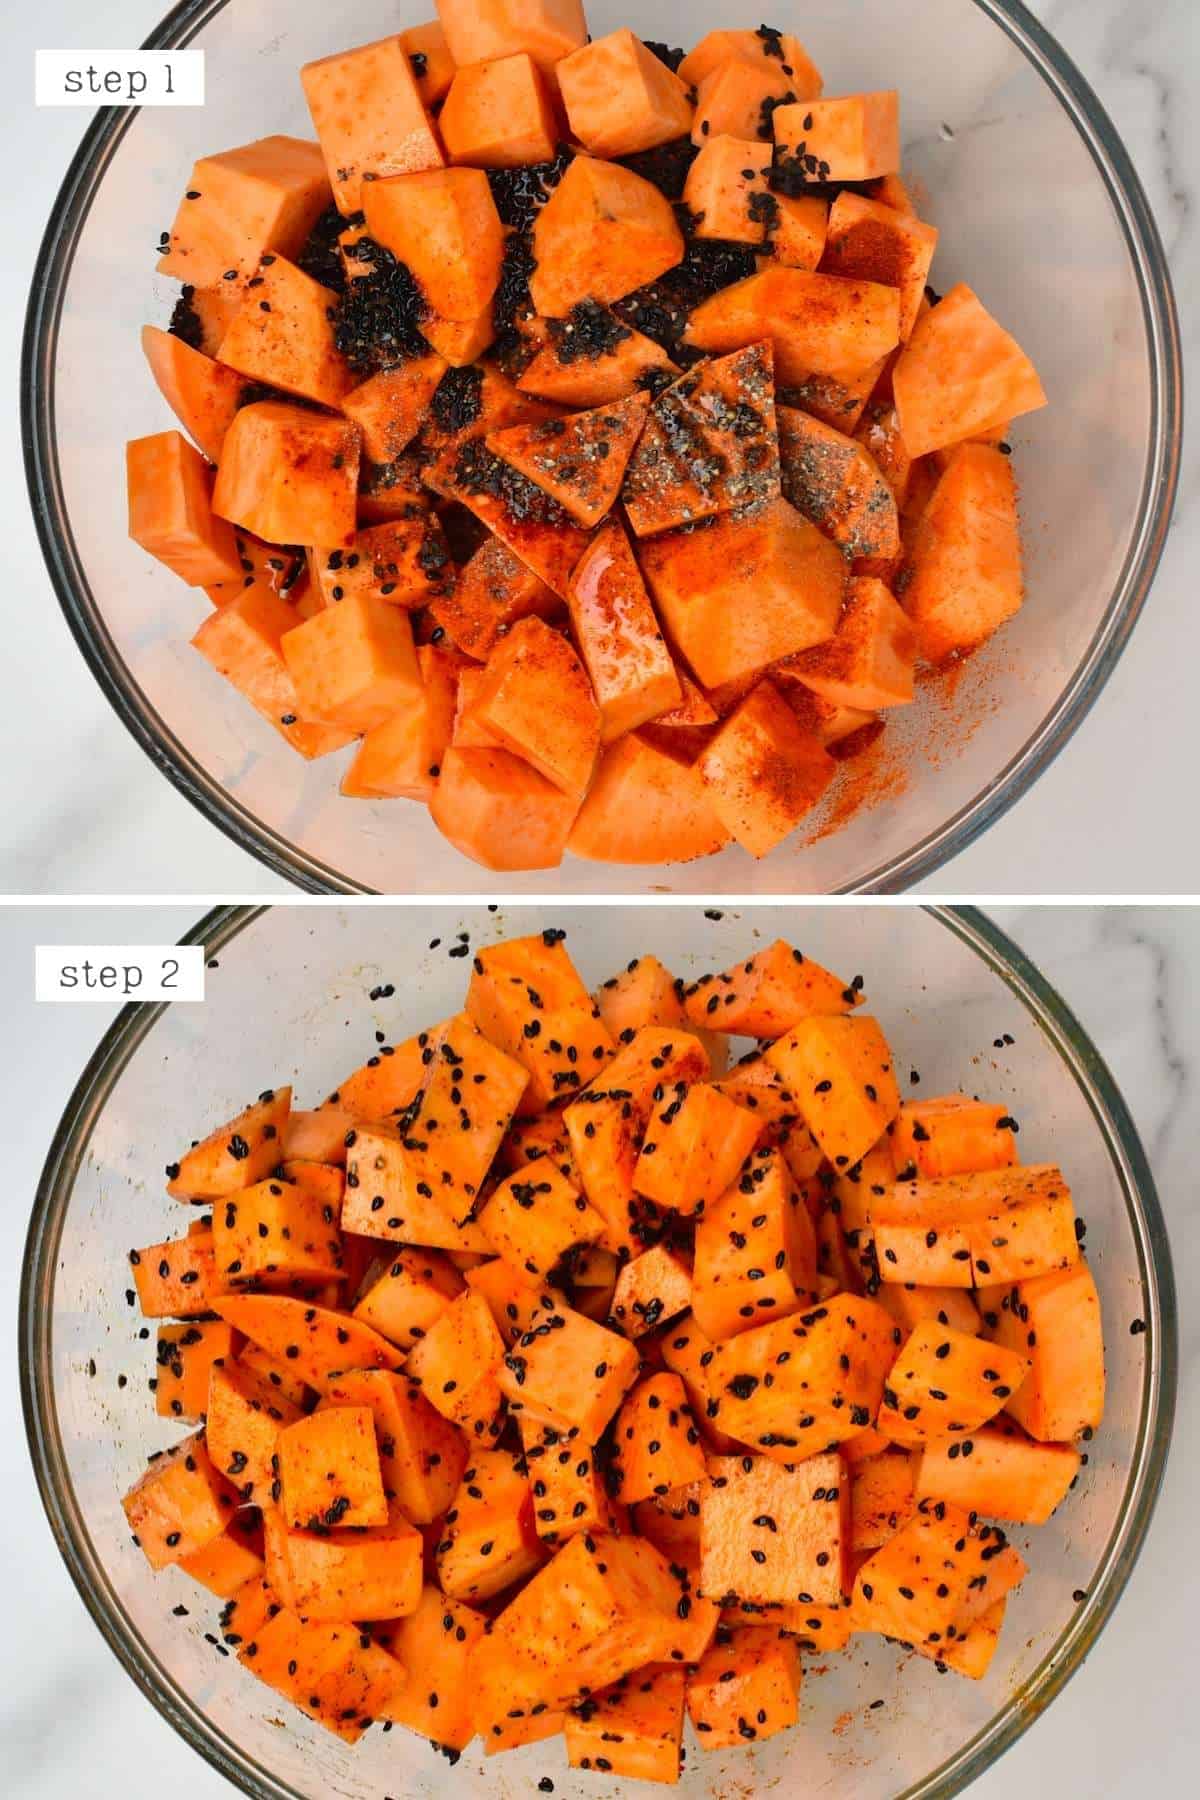 Mixing sweet potato with spices